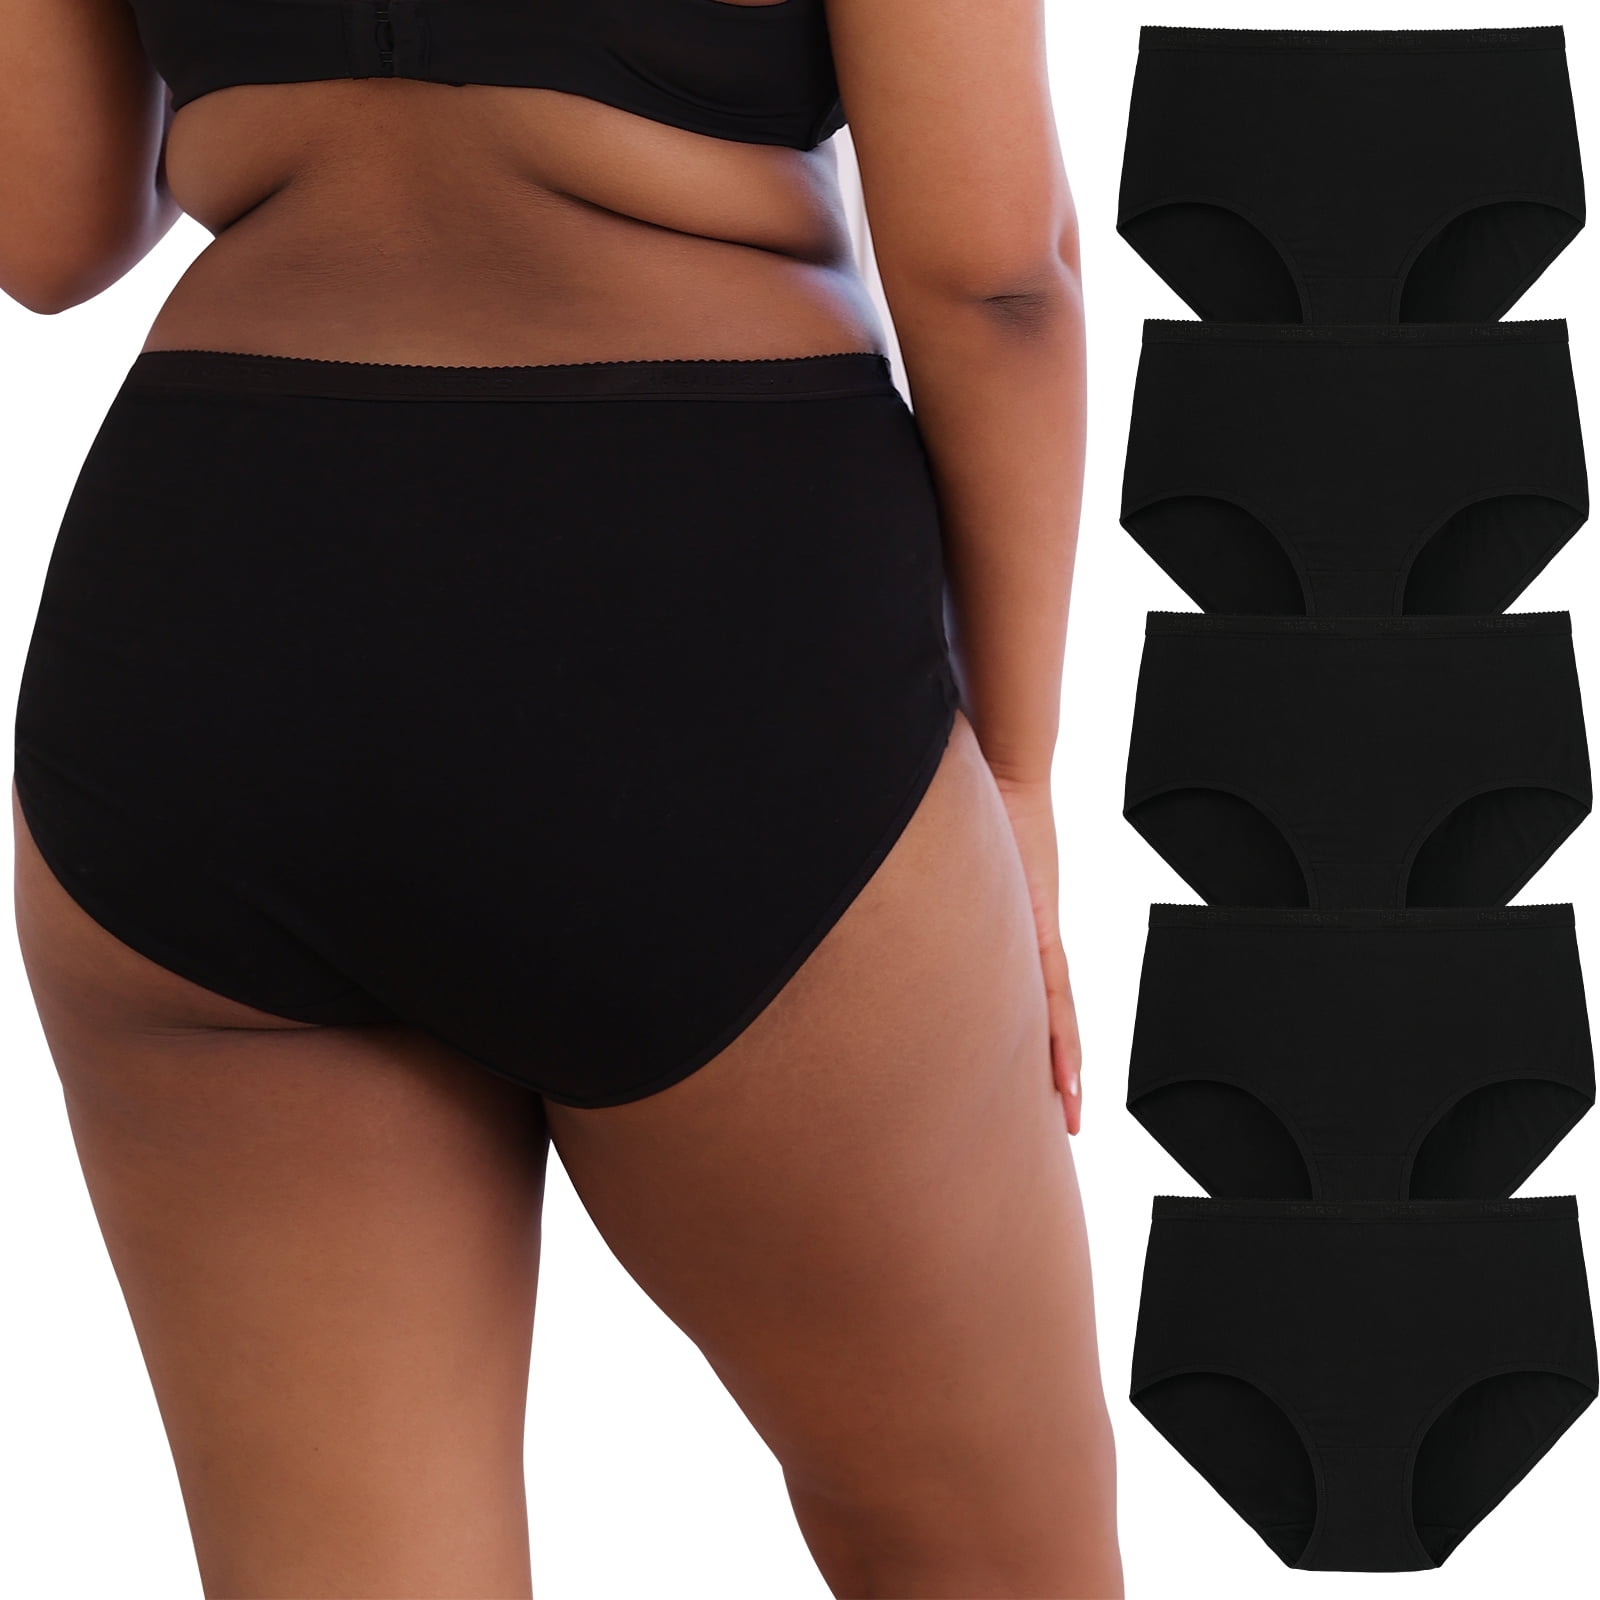 Sudally Womens High Cut Briefs Underwear Pack 6, Full Coverage Seamless  Stretch Comfort Waistband Hi-Cut Panties for Ladies Black at  Women's  Clothing store